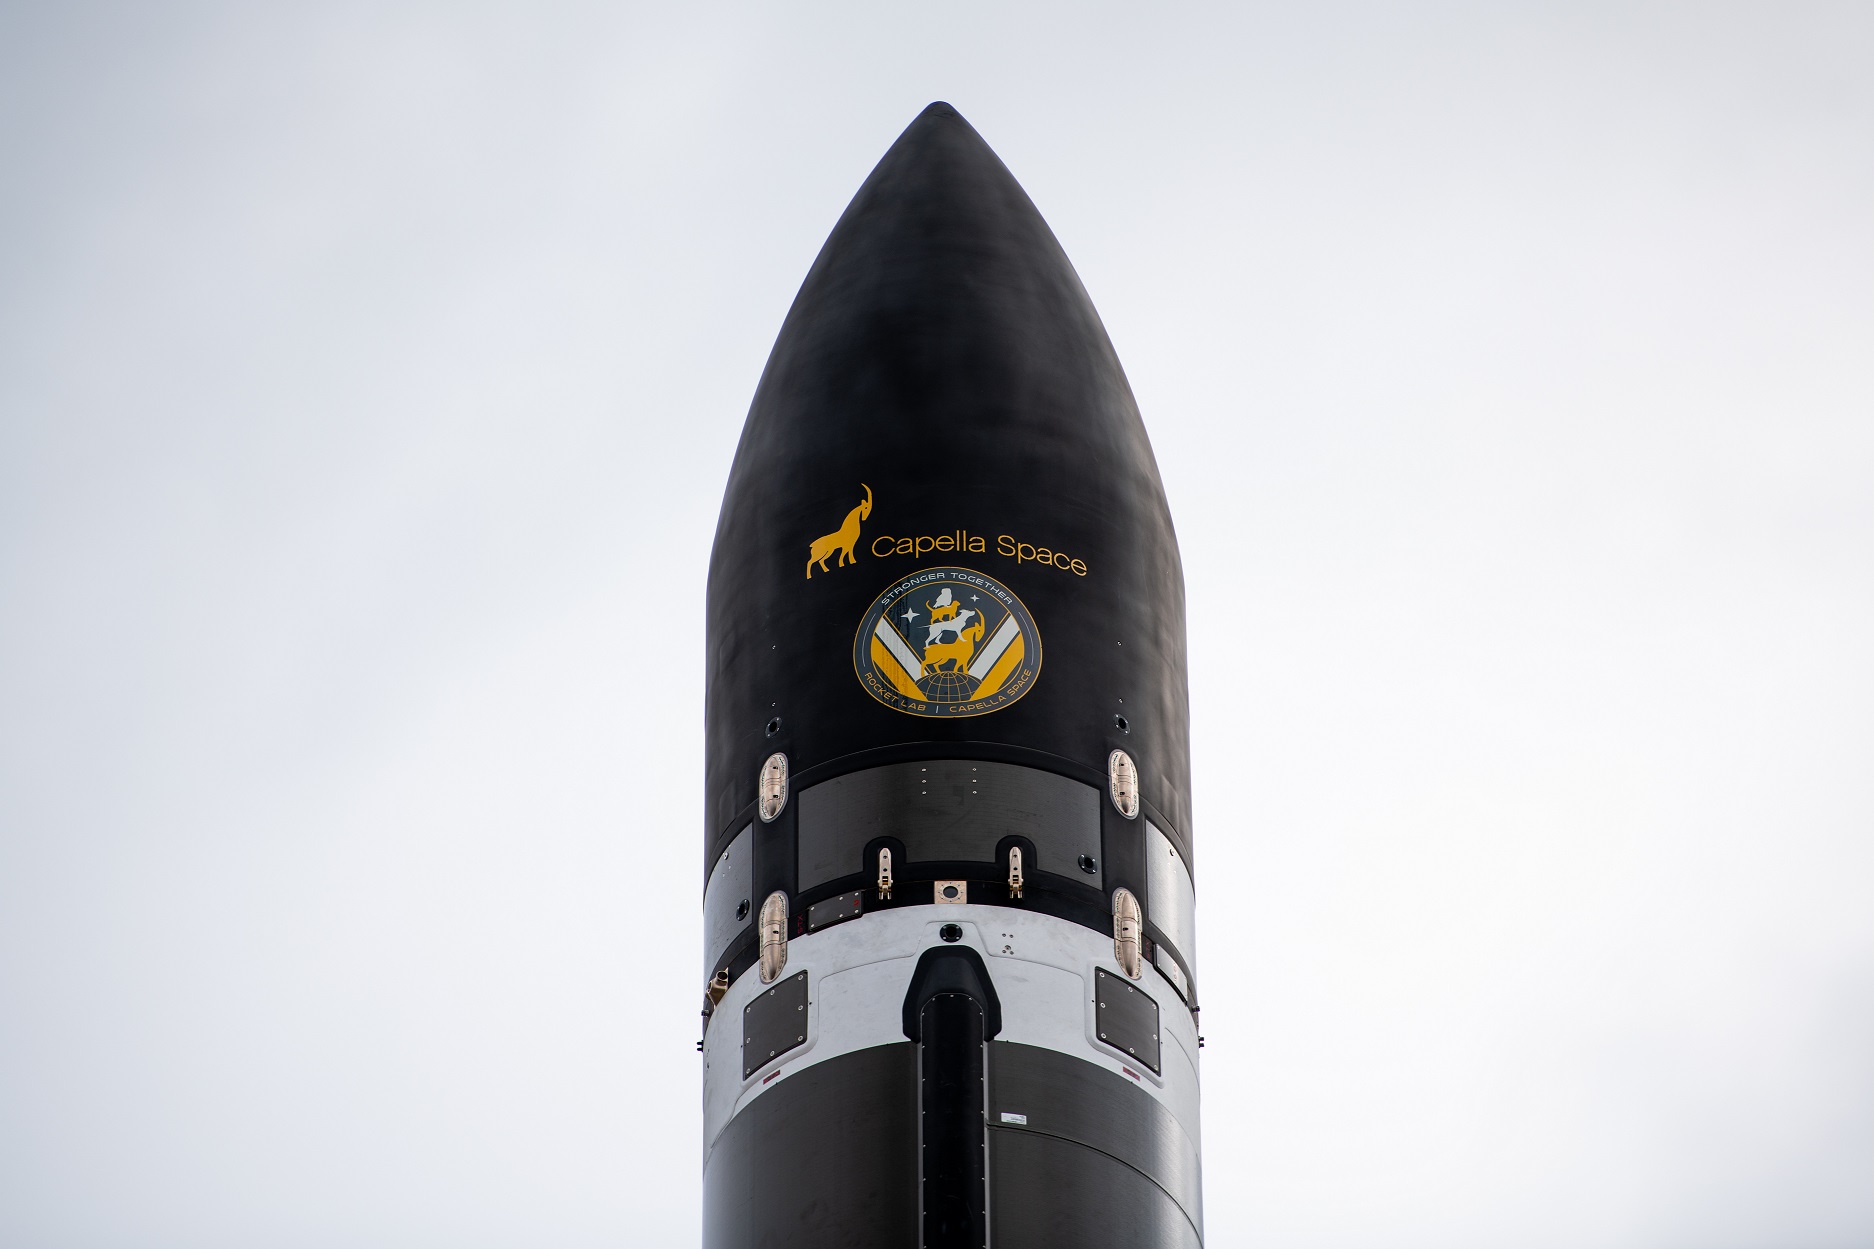 Rocket Lab Announces Launch Window for Next Mission in Multi-Launch Contract for Capella Space